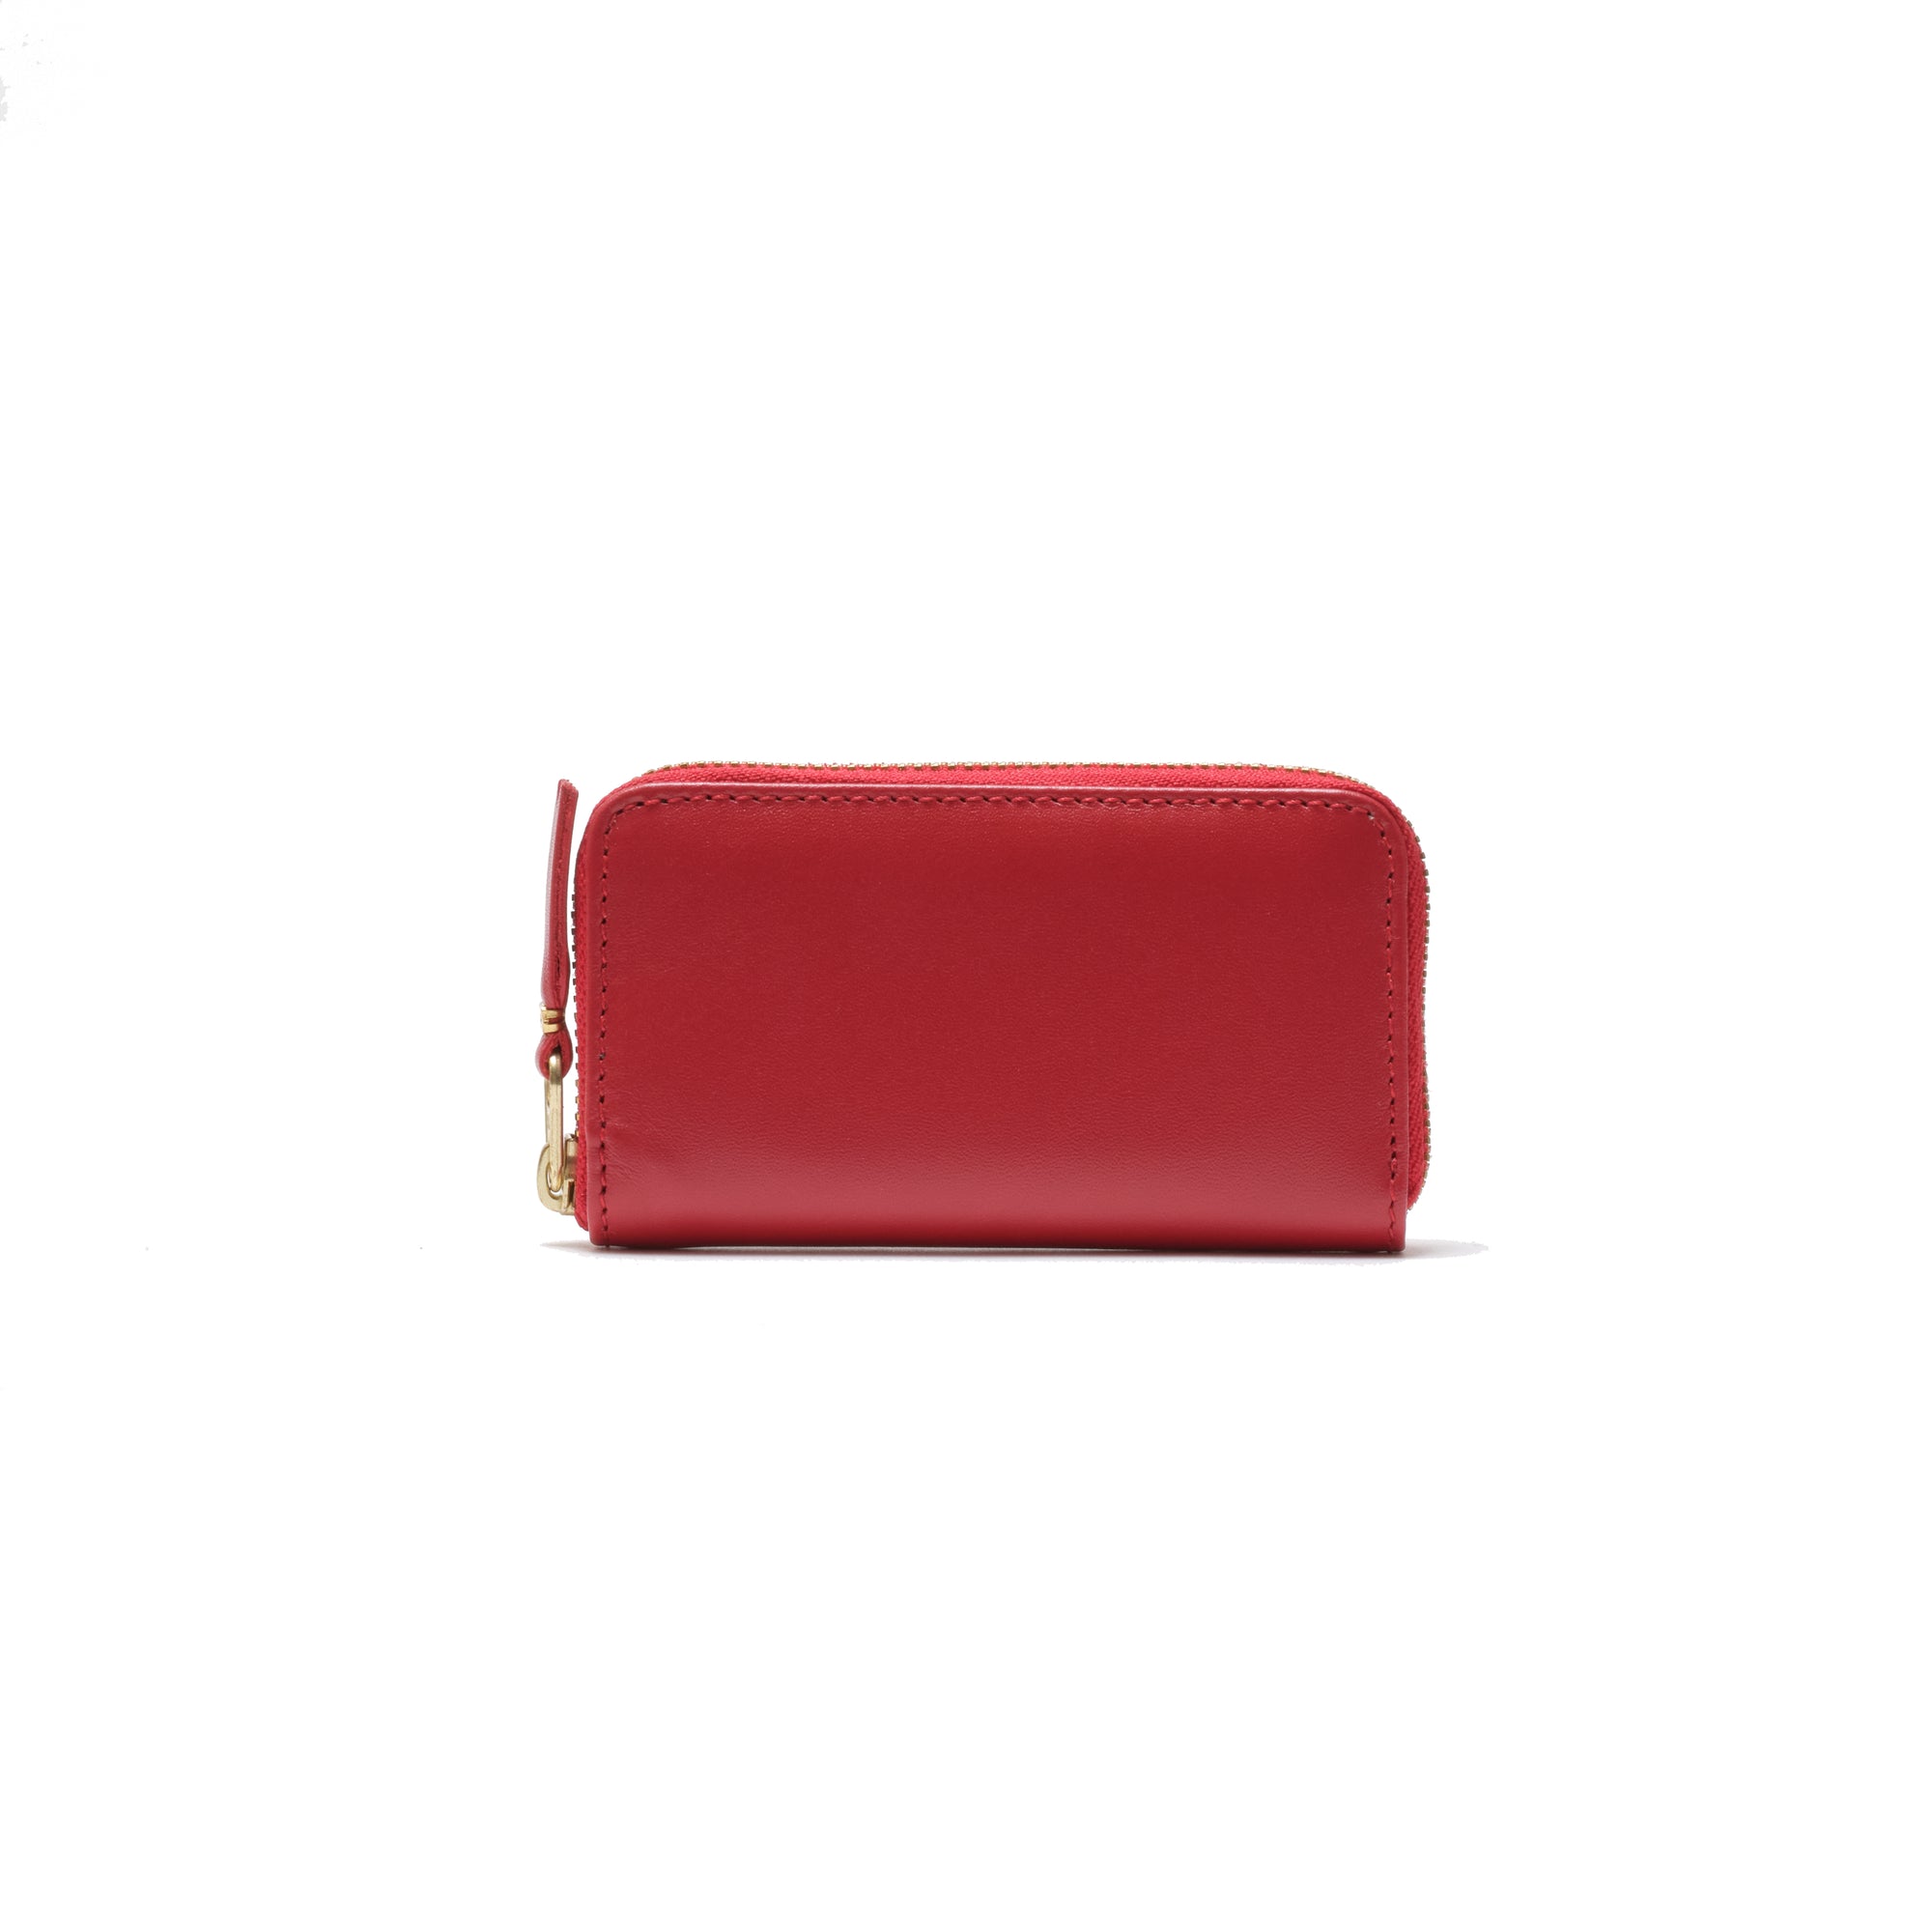 CDG WALLET - Colored Leather Line-8Z-A004 - (Red) view 1